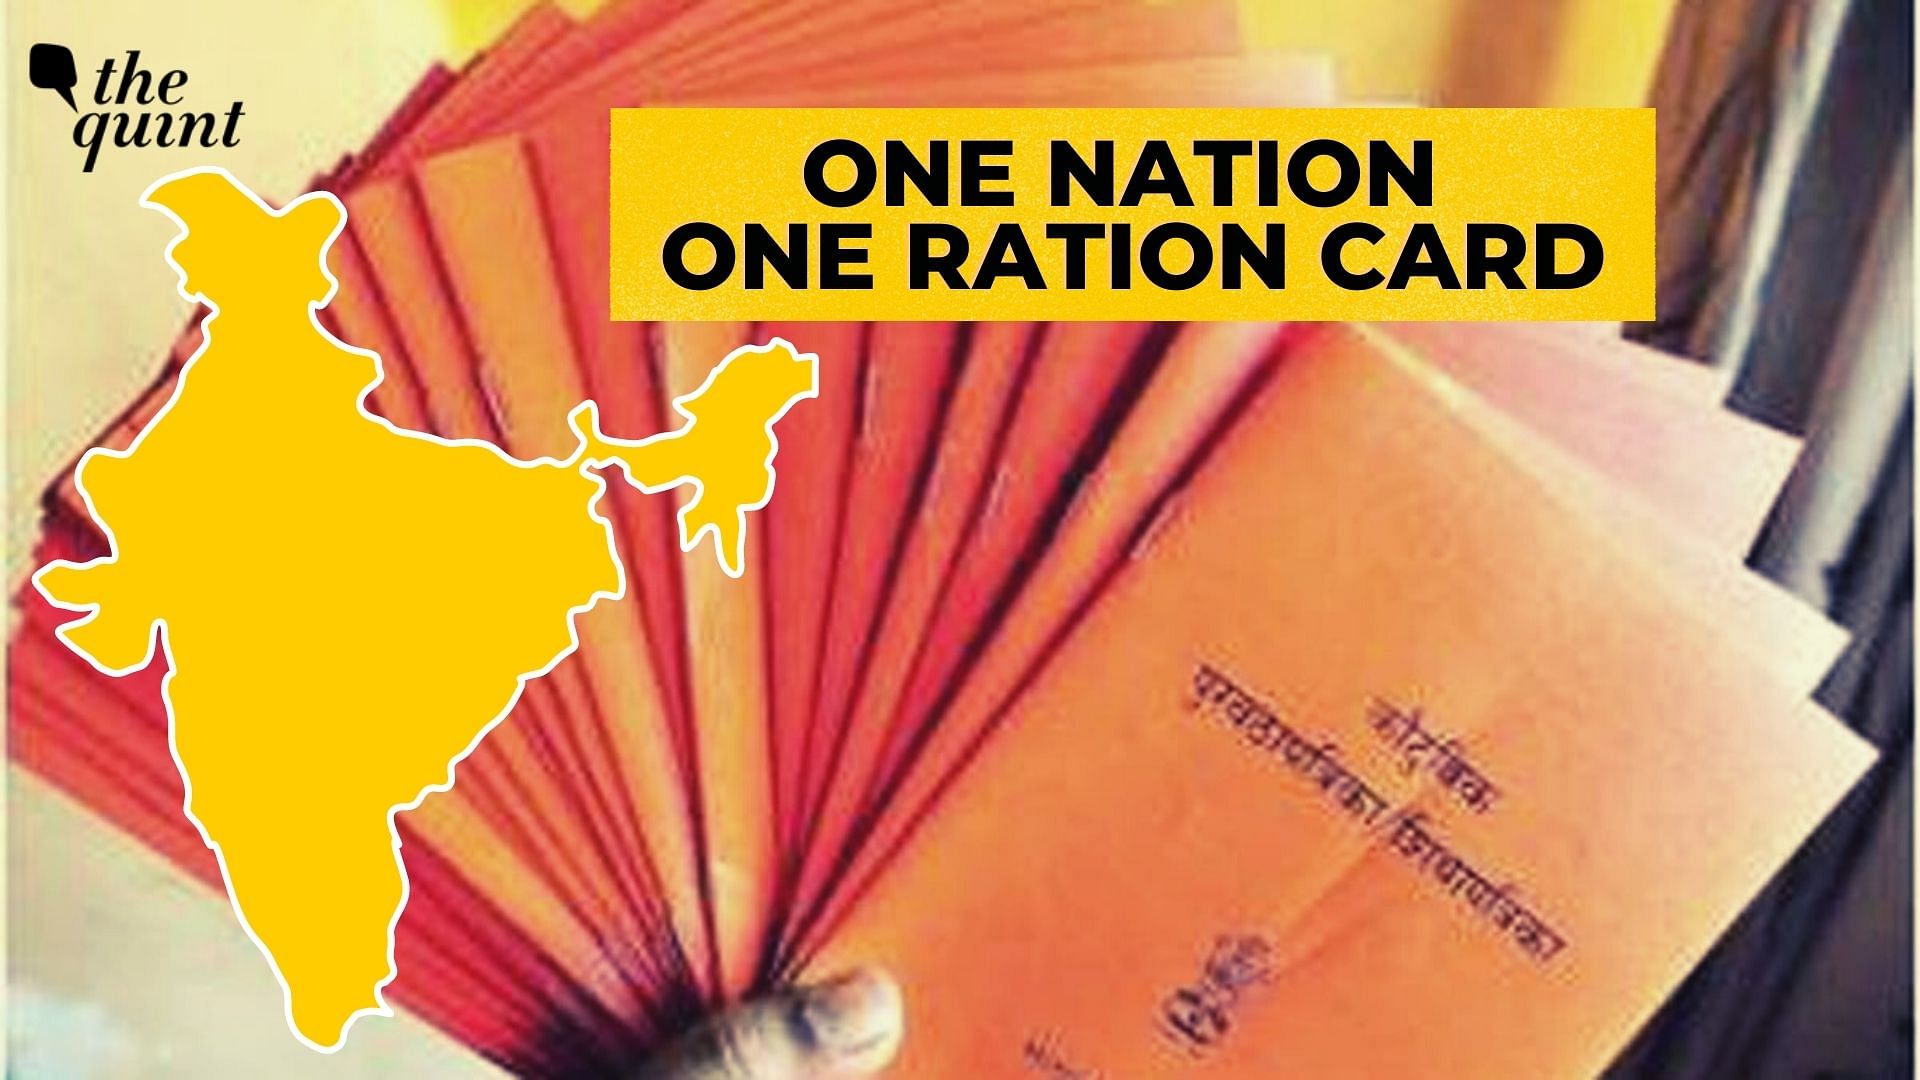 <div class="paragraphs"><p>What is ‘One Nation One Ration Card?’ How was it conceptualised? Why do we need it?</p></div><div class="paragraphs"><p><br></p></div>